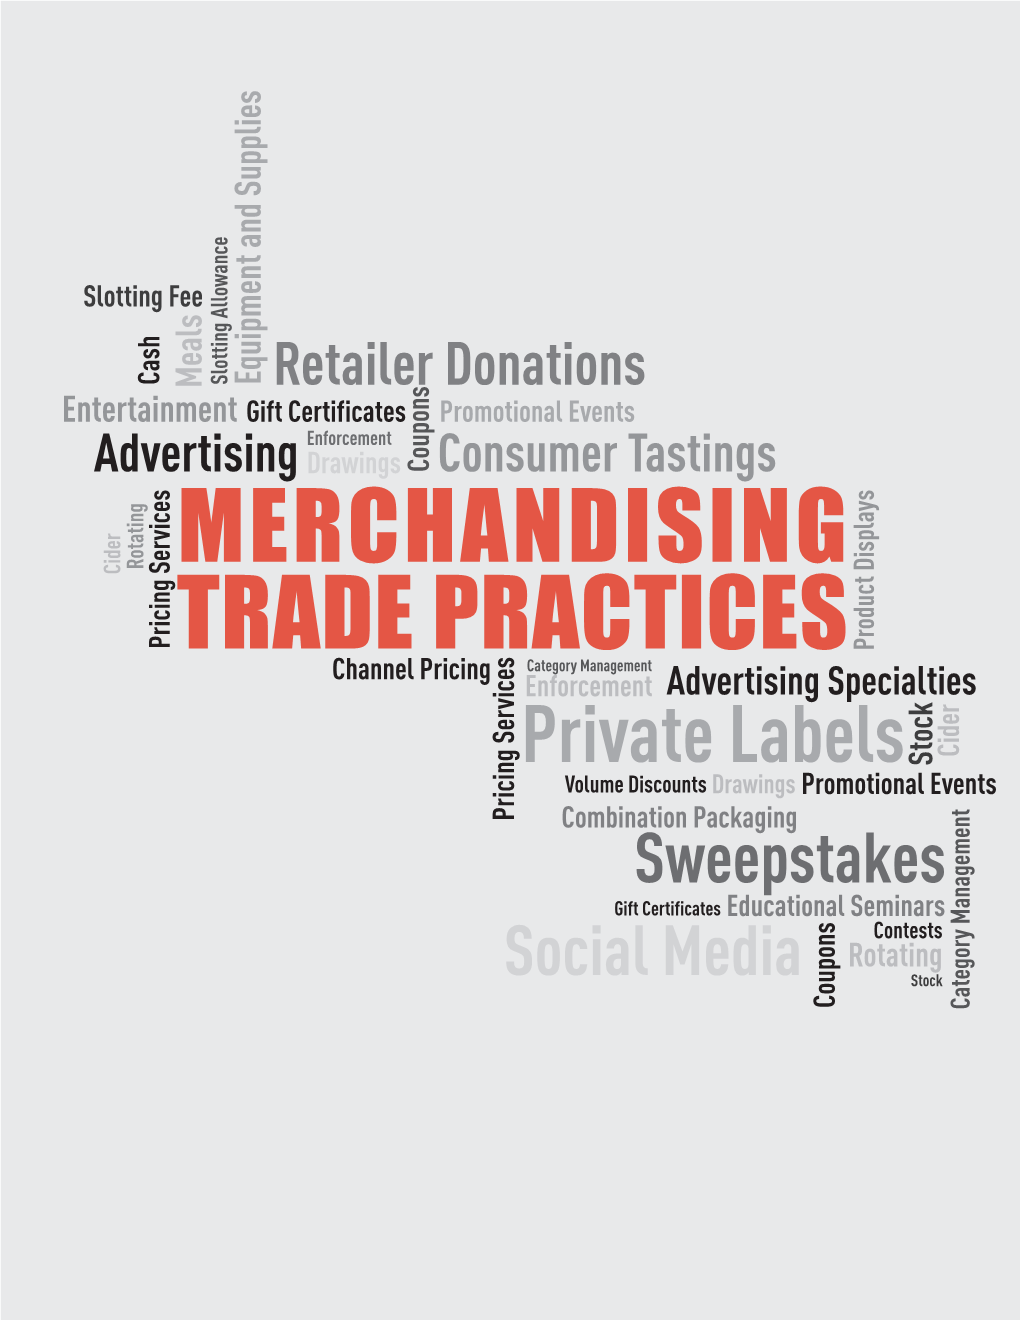 Merchandising Trade Practices Data Publication Is a Joint Effort with the National Conference of State Liquor Administrators (NCSLA) and Its Members